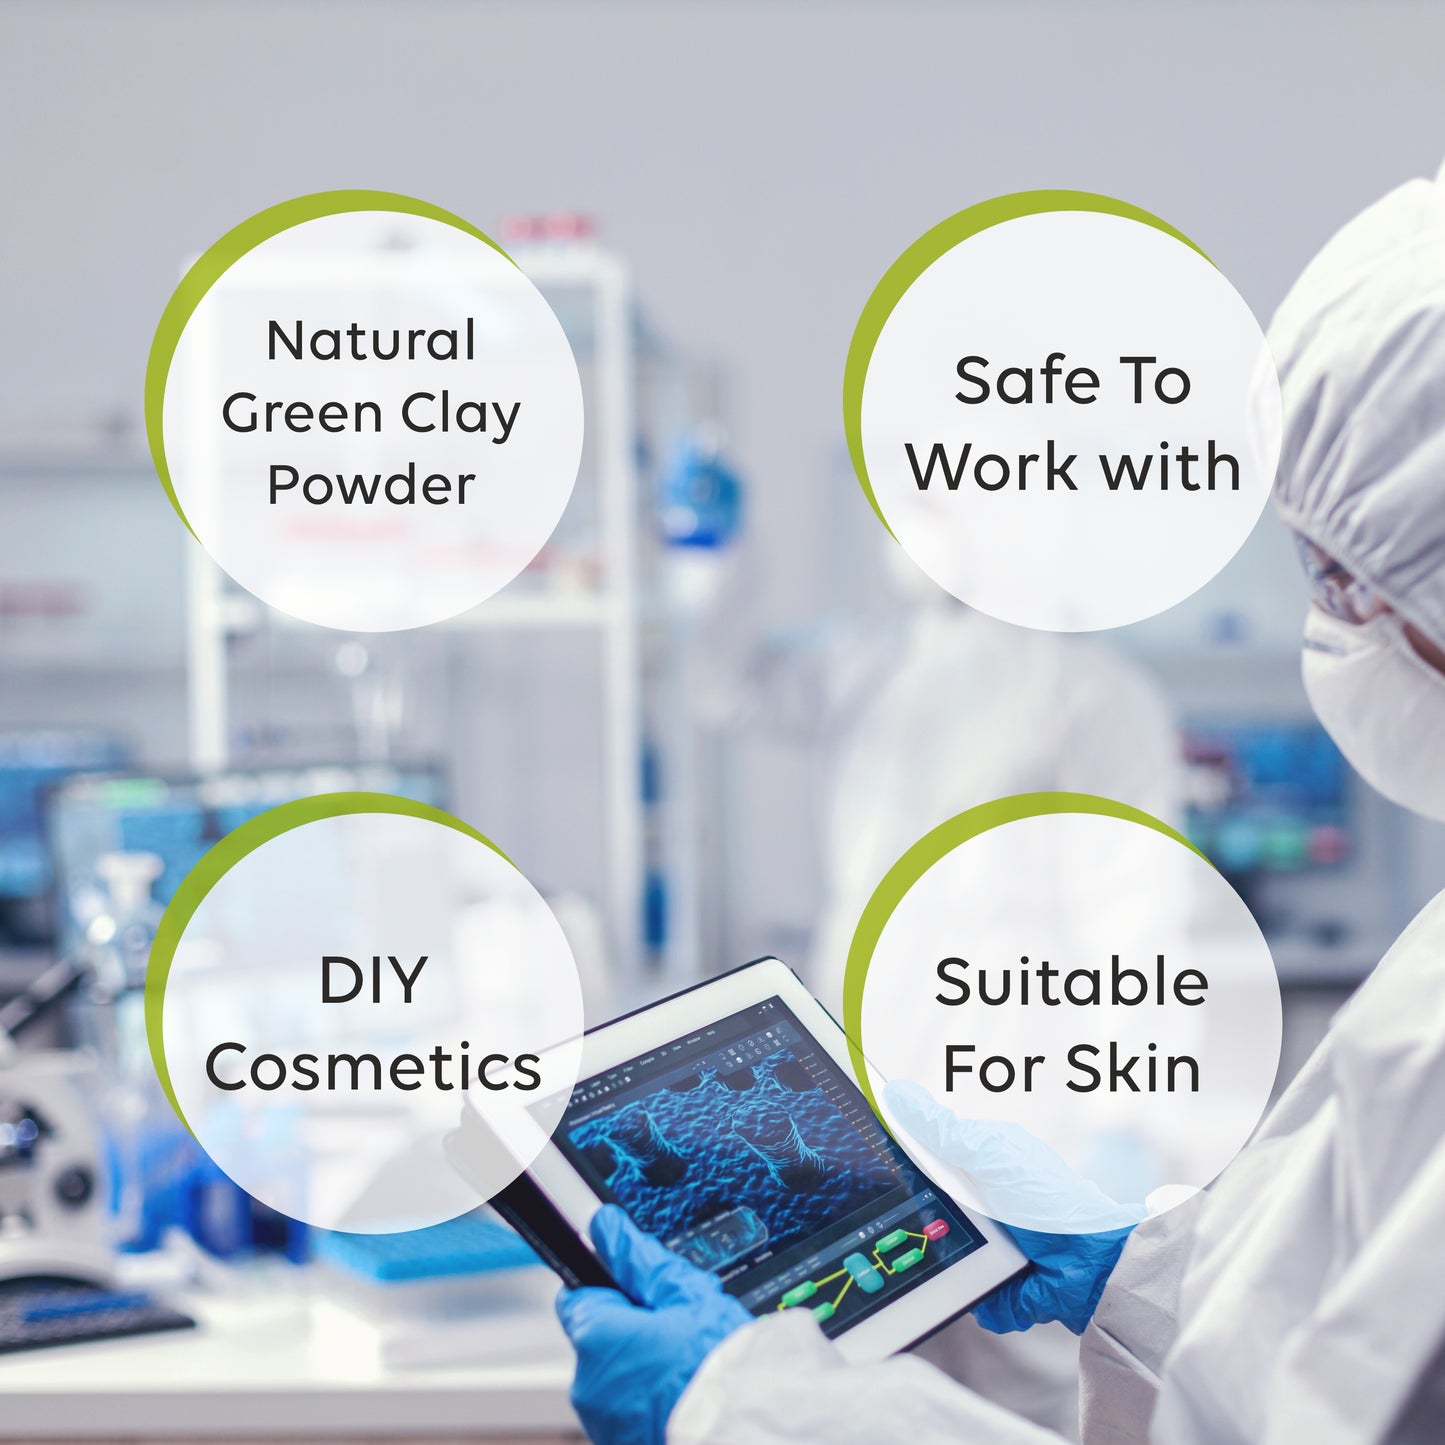 cosmeticmaking, saopmaking, cosmeticmakingingredients, soapmakingingredients,cosmeticingredients,naturalingredients,organicingredients,veganingredients, essentialoils,fragranceoils,carrieroils, carrieroils, butters, clays,botanicals,herbs,preservatives,emulsifiers,surfa ctants,thickeners, thickeners,exfoliants, calamine clay